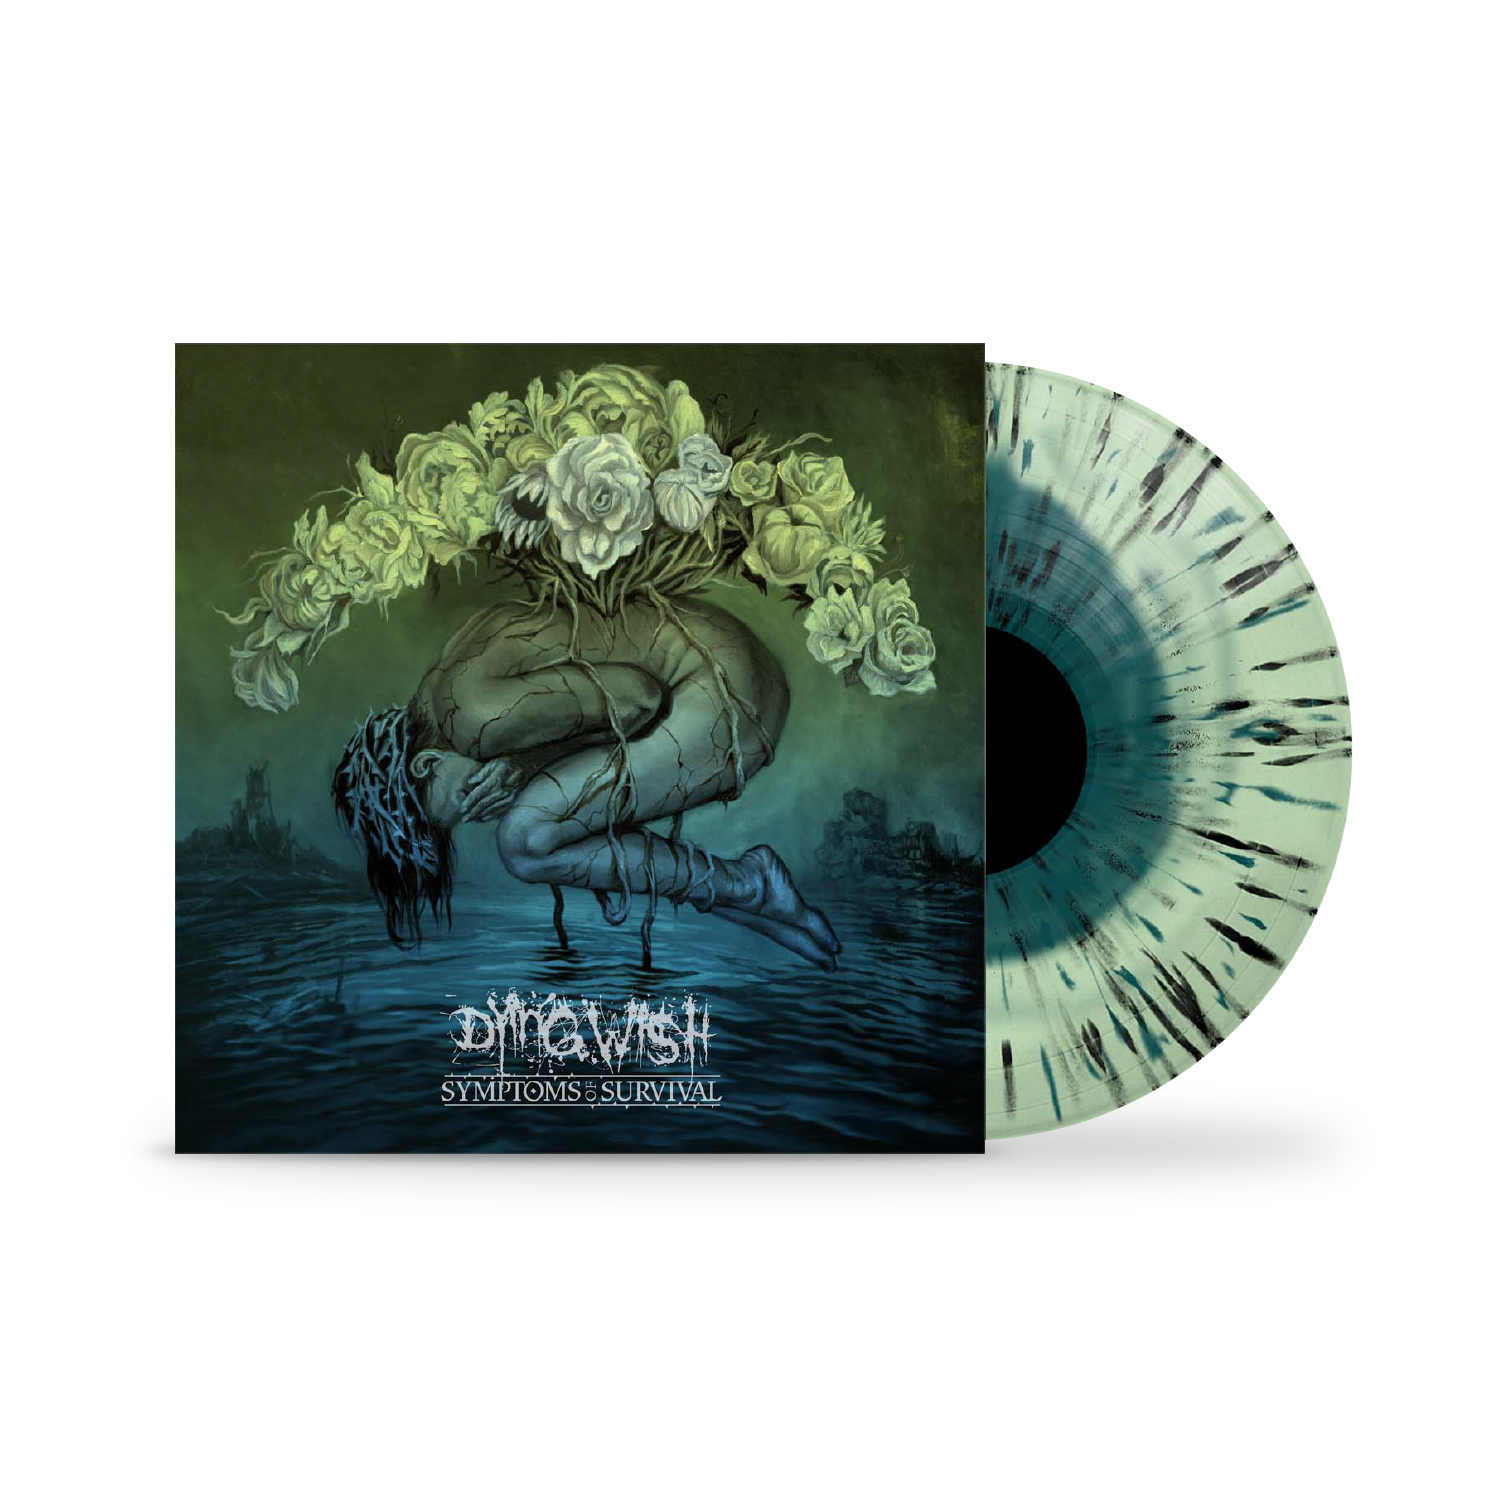 Symptoms of Survival 12" Vinyl - Blue in Green with Black Splatter (Pre-Order Limited to 1000 Copies)